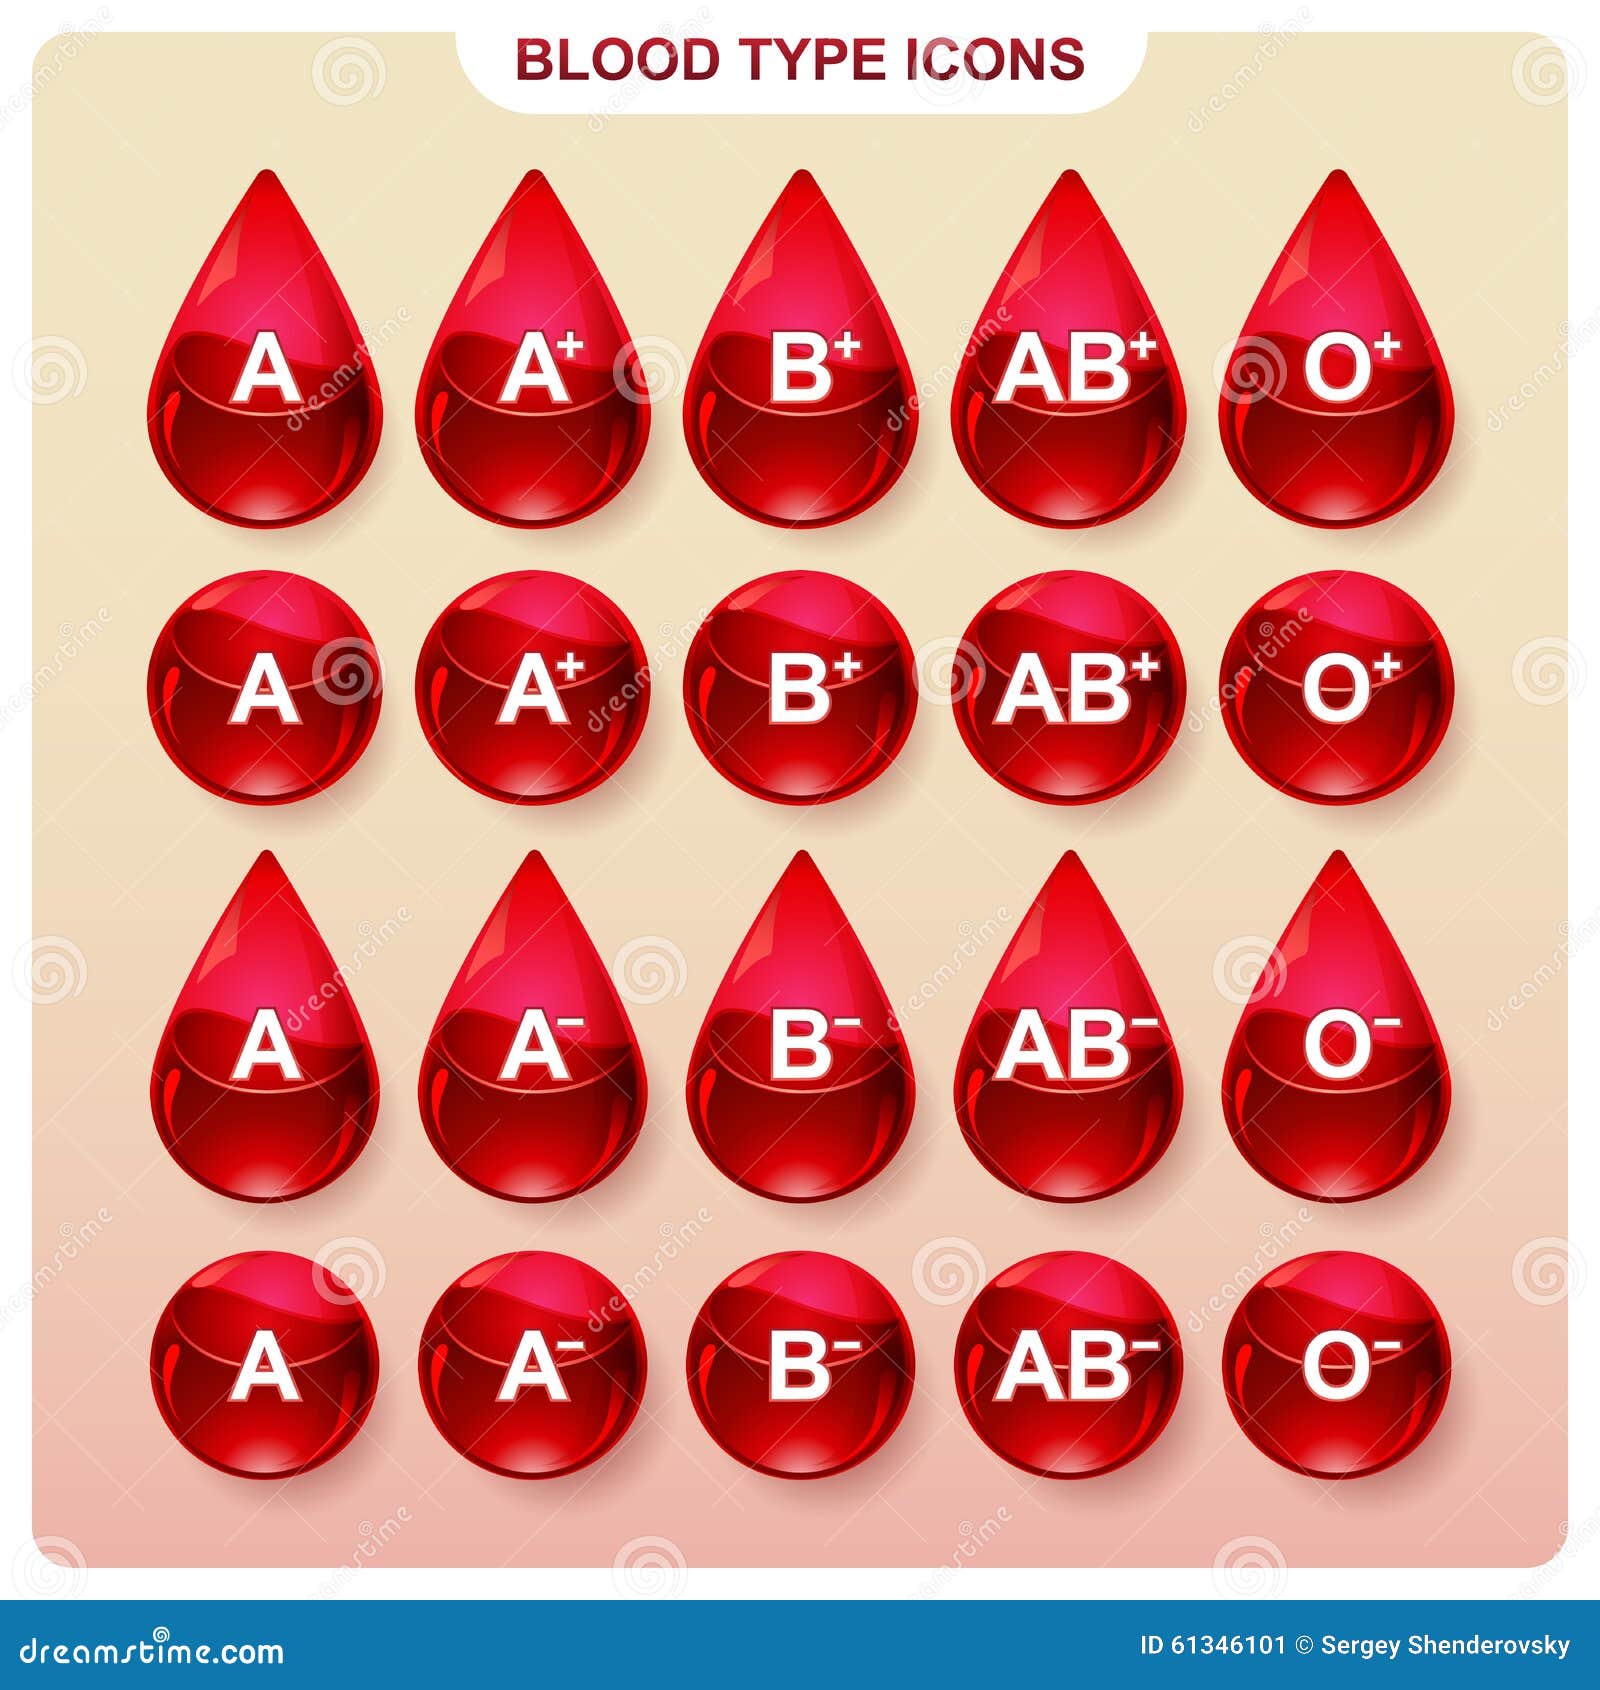 blood type clipart - photo #9